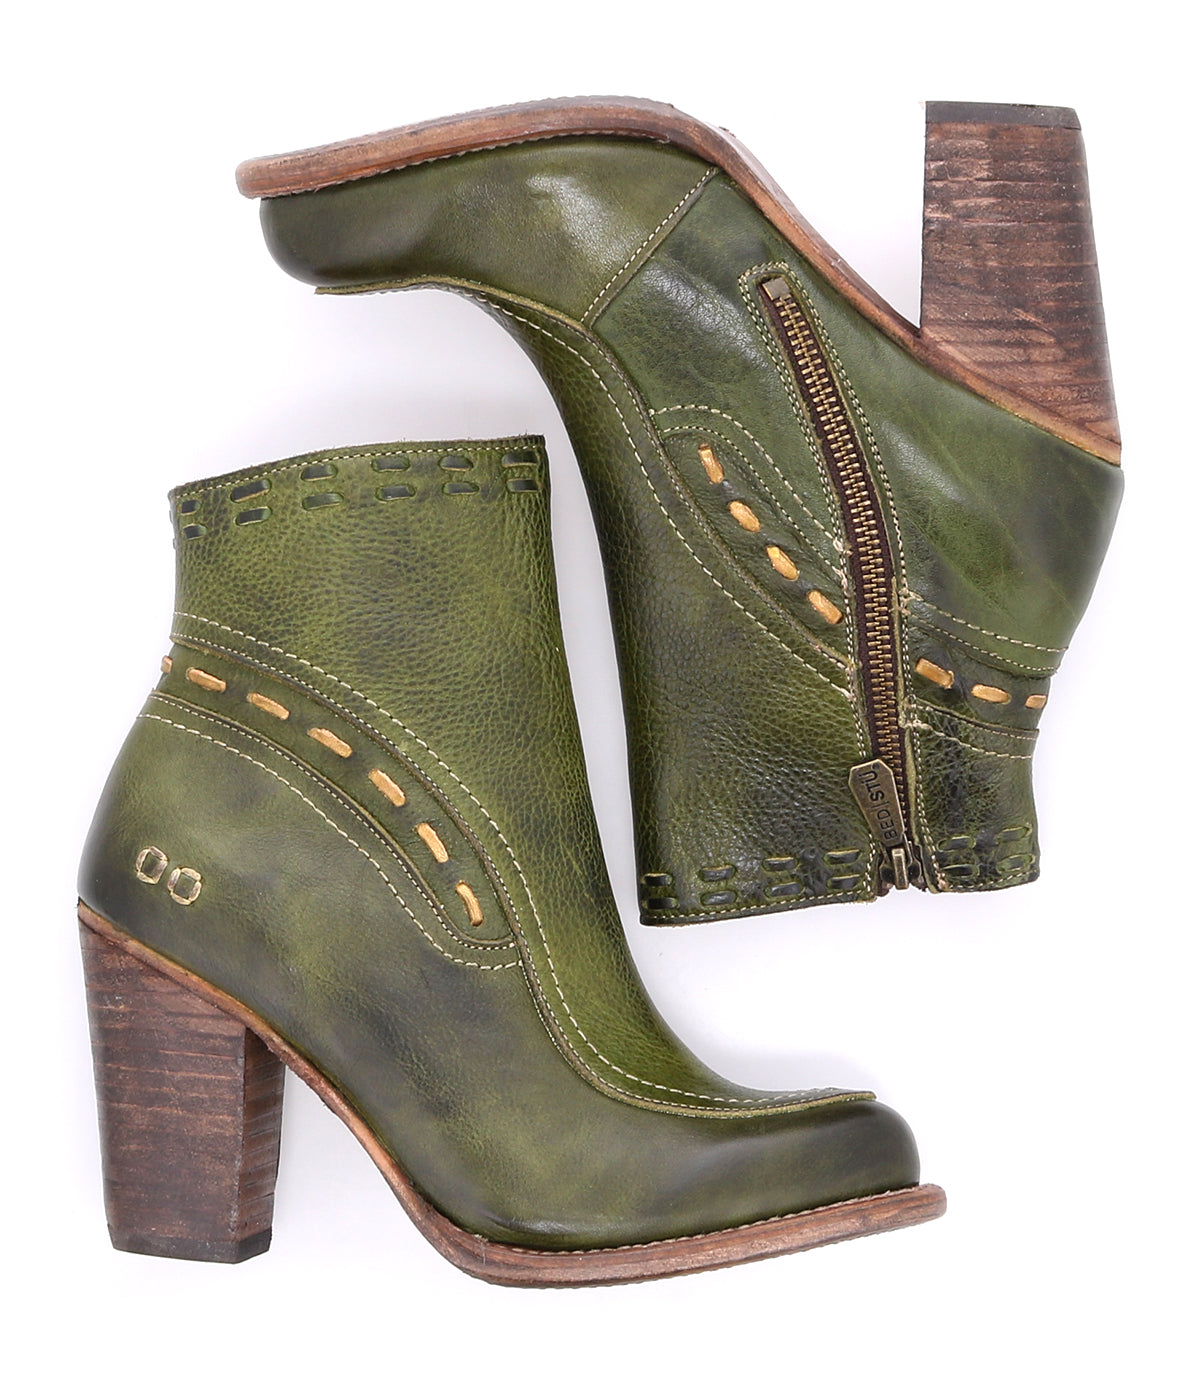 A pair of Yuno green leather ankle boots by Bed Stu.